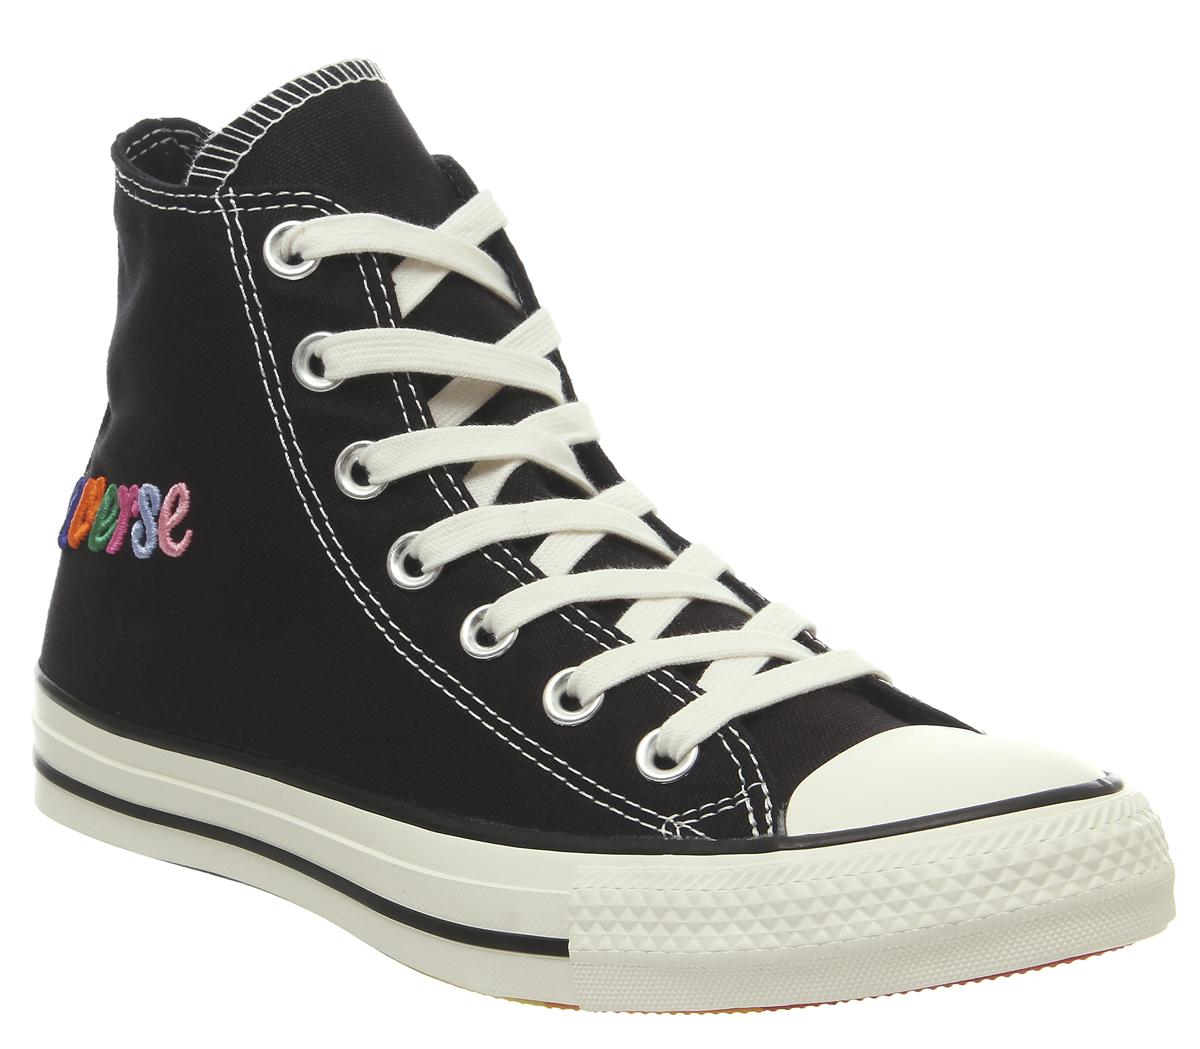 Converse Converse All Star Hi Trainers Black Egret Rainbow Exclusive - Hers  trainers